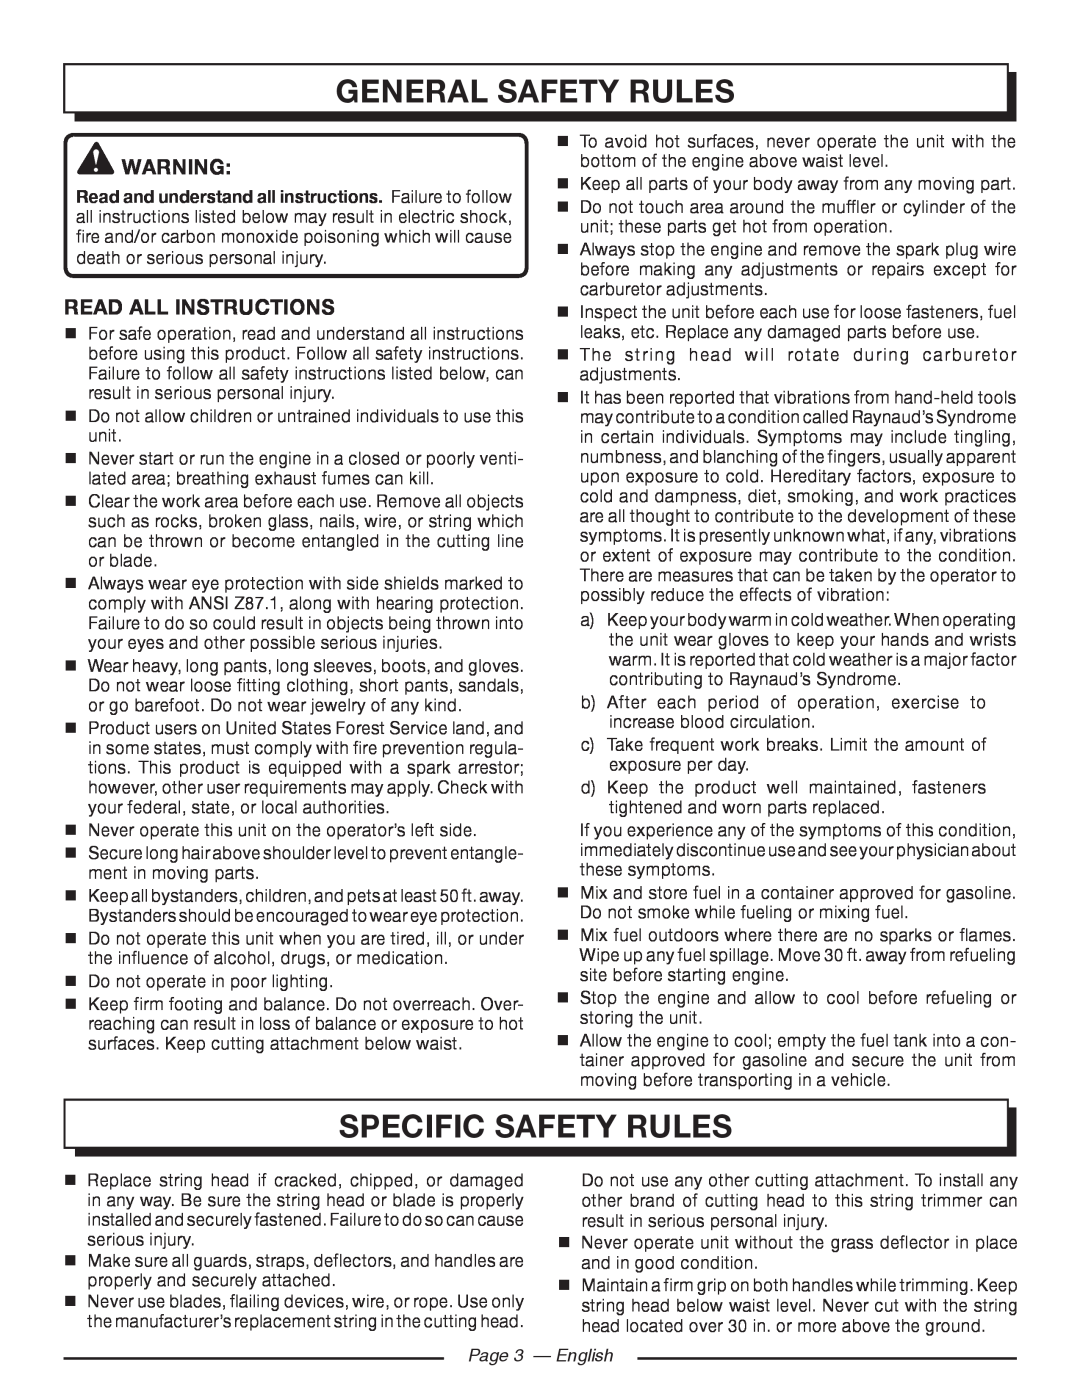 Homelite UT21006 manuel dutilisation General Safety Rules, Specific Safety Rules, read all instructions, Page 3 - English 